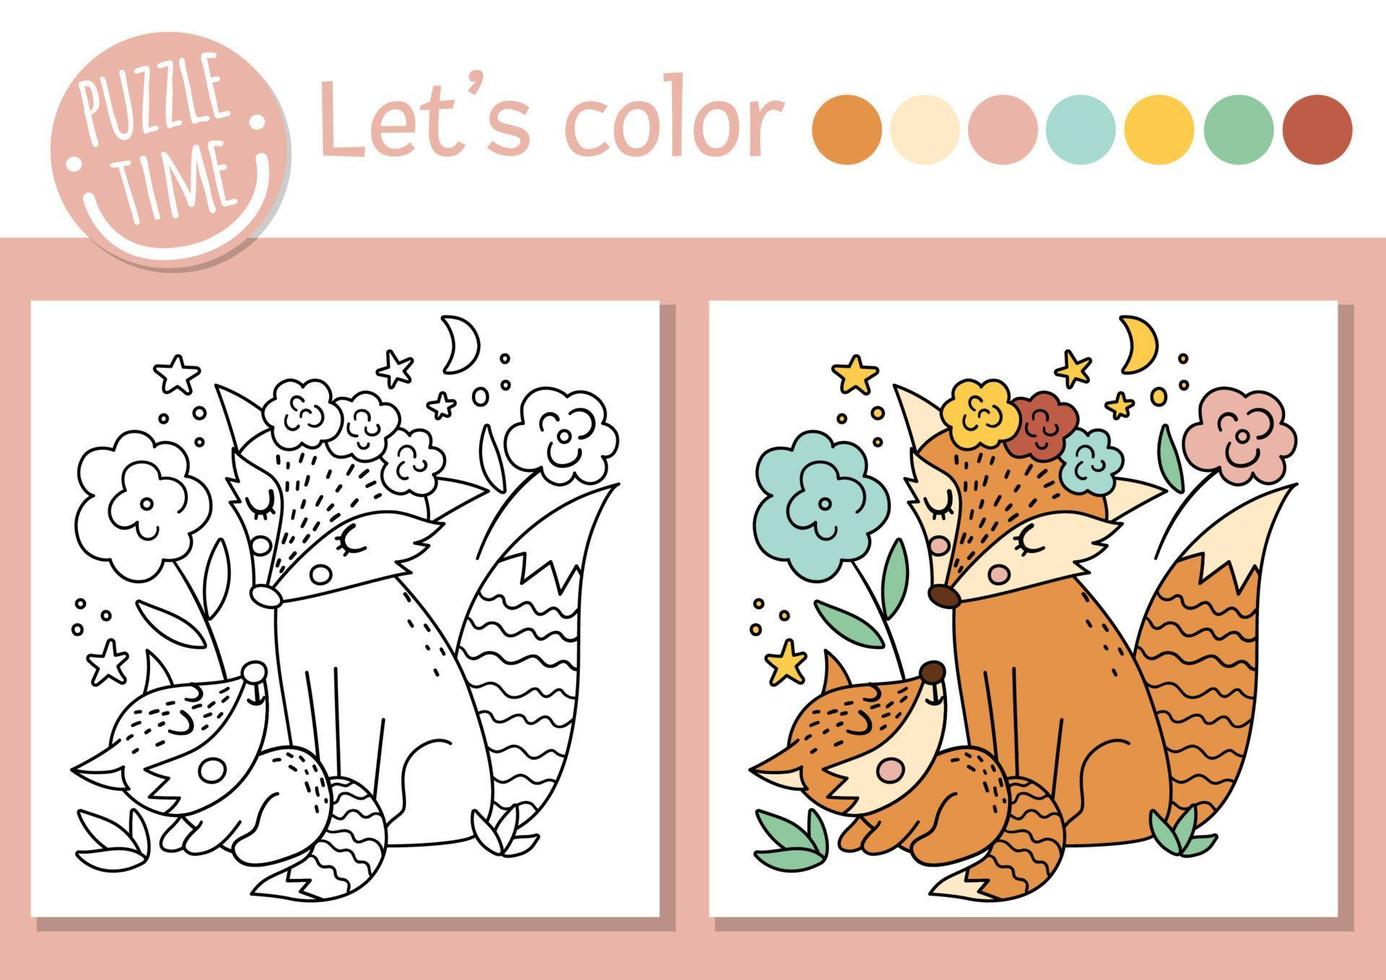 Mothers day coloring page for children with baby fox and mother. Vector outline illustration showing family love. Adorable spring holiday color book for kids with colored example